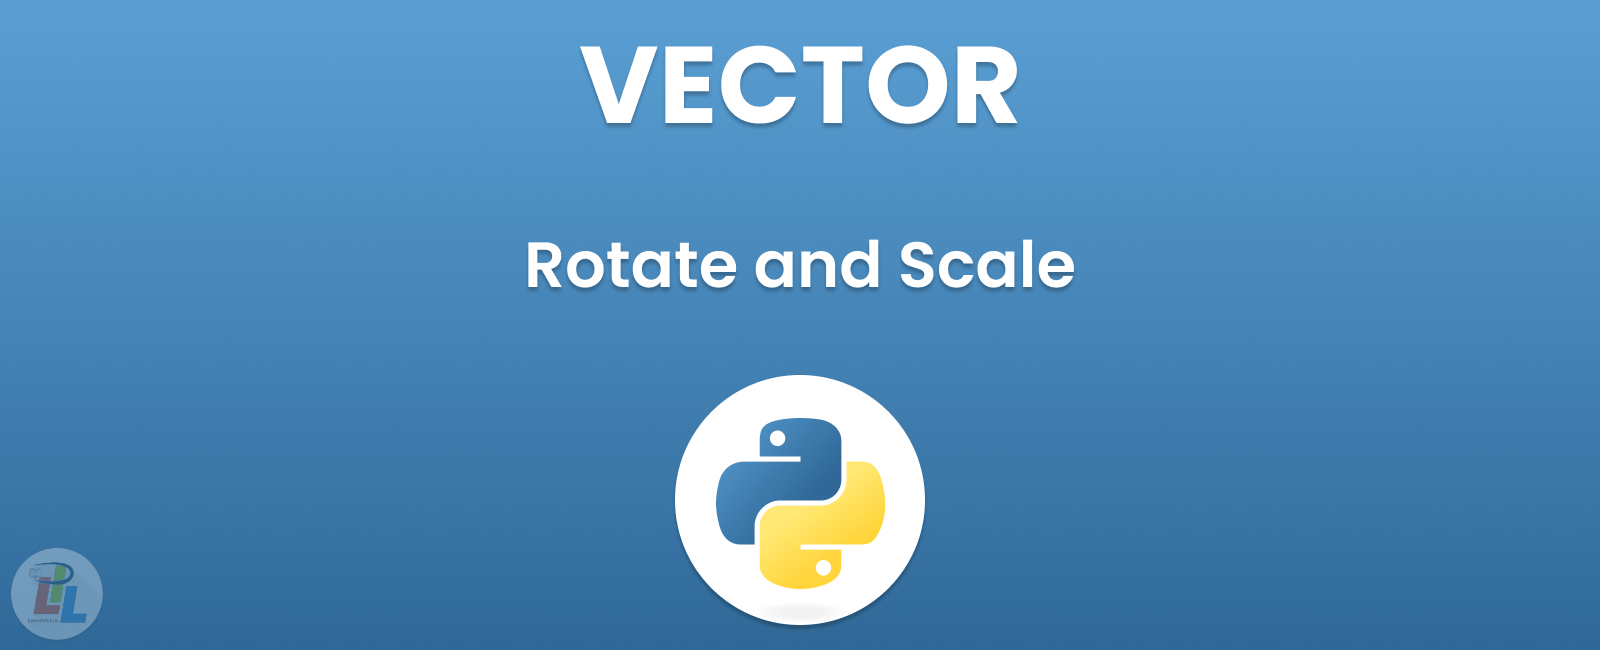 How to Rotate and Scale a Vector in Python